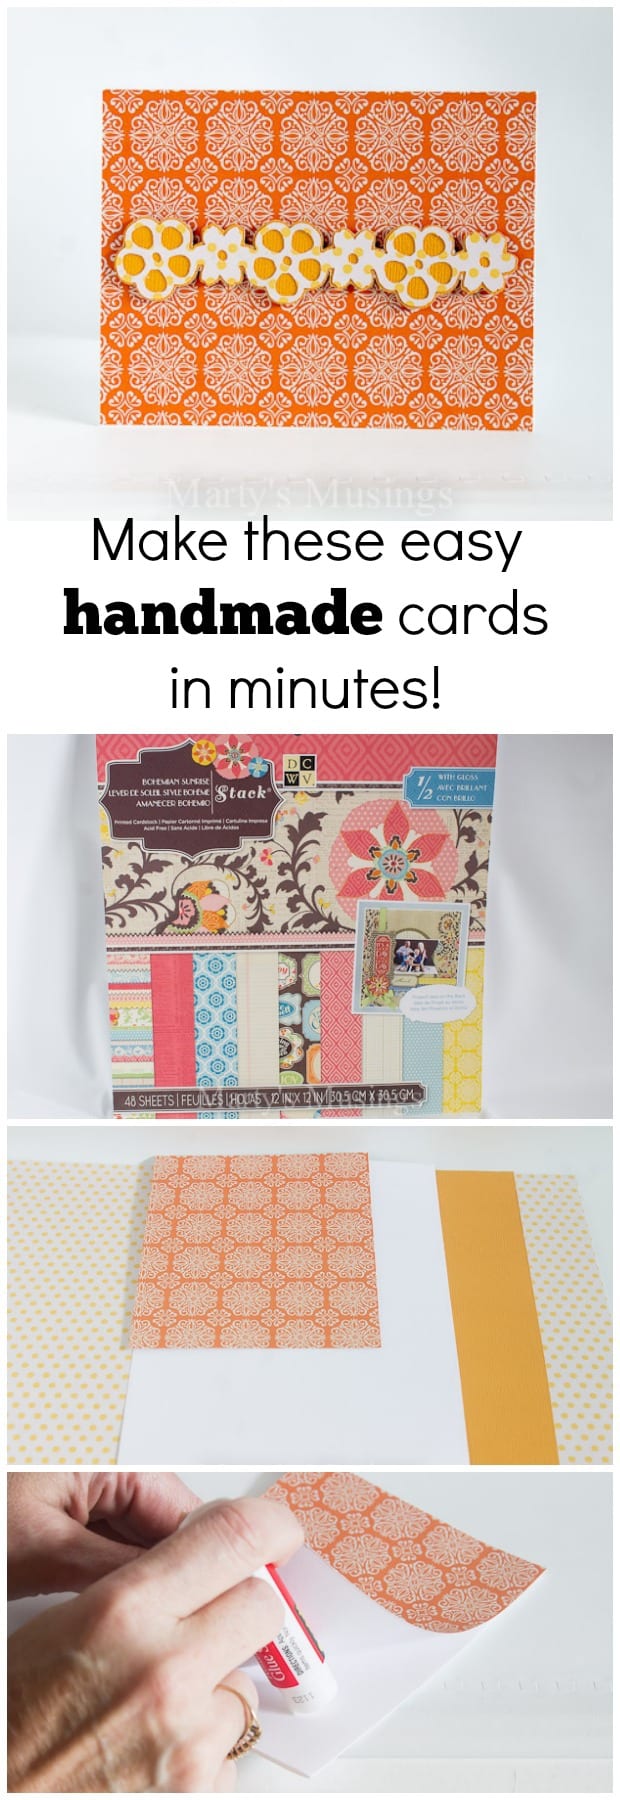 Handmade Card Ideas for Any Occasion - Marty's Musings